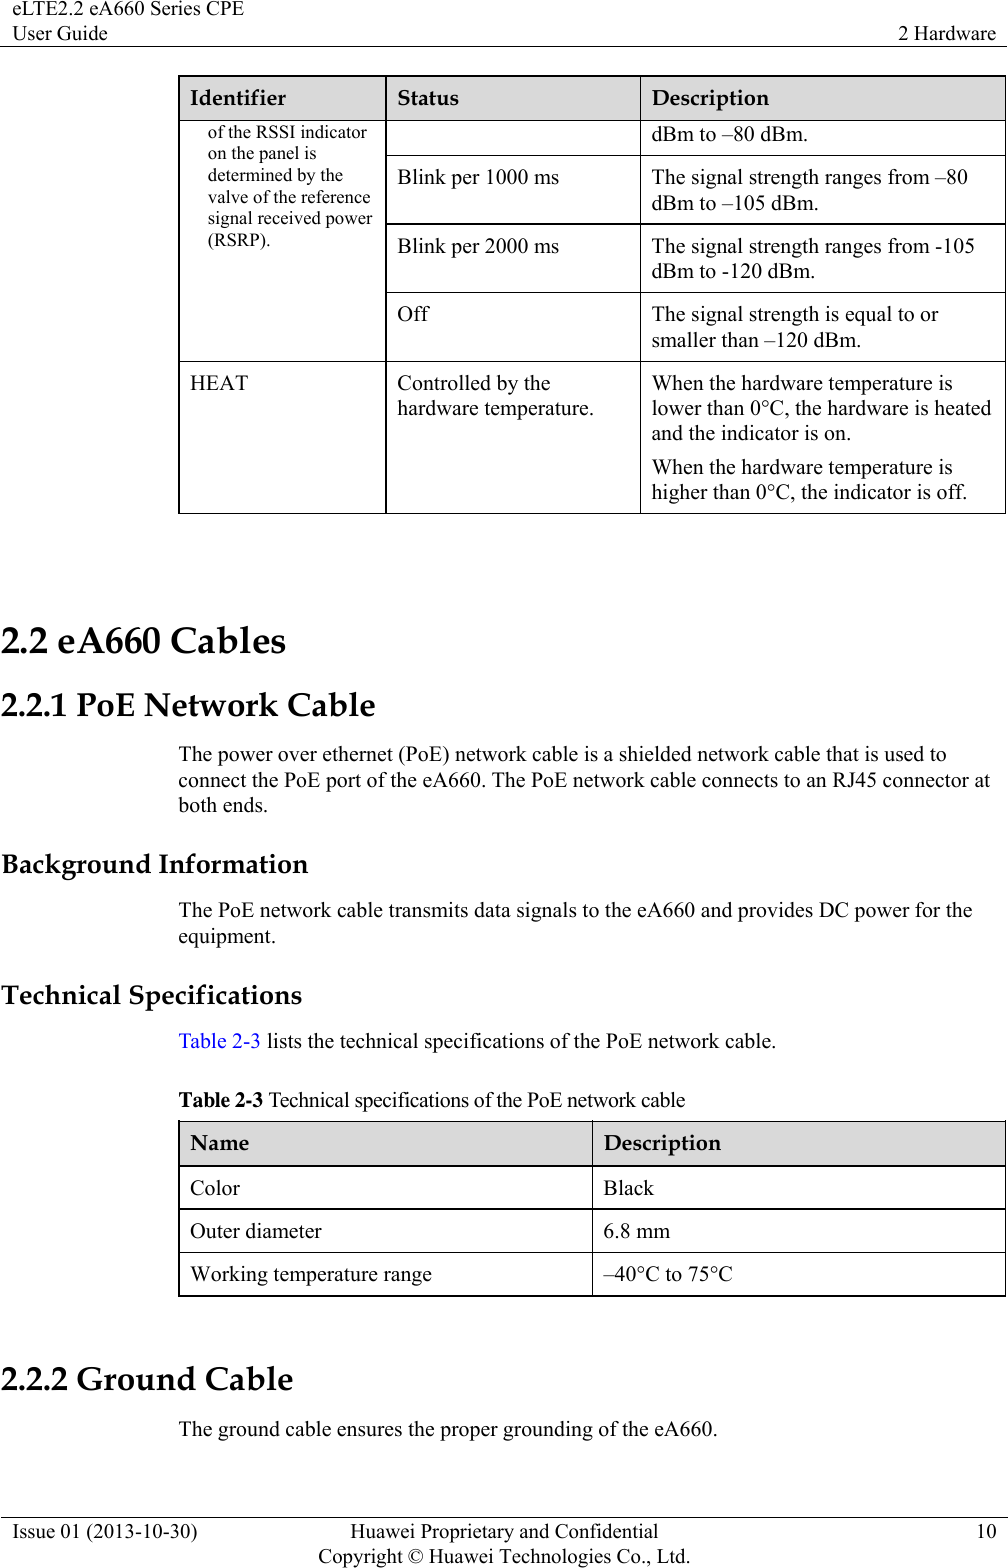 eLTE2.2 eA660 Series CPE User Guide  2 Hardware Issue 01 (2013-10-30)  Huawei Proprietary and Confidential         Copyright © Huawei Technologies Co., Ltd.10 Identifier  Status  Description of the RSSI indicator on the panel is determined by the valve of the reference signal received power (RSRP). dBm to –80 dBm. Blink per 1000 ms  The signal strength ranges from –80 dBm to –105 dBm. Blink per 2000 ms  The signal strength ranges from -105 dBm to -120 dBm. Off  The signal strength is equal to or smaller than –120 dBm.   HEAT Controlled by the hardware temperature. When the hardware temperature is lower than 0°C, the hardware is heated and the indicator is on.   When the hardware temperature is higher than 0°C, the indicator is off.  2.2 eA660 Cables 2.2.1 PoE Network Cable The power over ethernet (PoE) network cable is a shielded network cable that is used to connect the PoE port of the eA660. The PoE network cable connects to an RJ45 connector at both ends. Background Information The PoE network cable transmits data signals to the eA660 and provides DC power for the equipment. Technical Specifications Table 2-3 lists the technical specifications of the PoE network cable. Table 2-3 Technical specifications of the PoE network cable Name  Description Color Black Outer diameter  6.8 mm Working temperature range  –40°C to 75°C  2.2.2 Ground Cable The ground cable ensures the proper grounding of the eA660. 